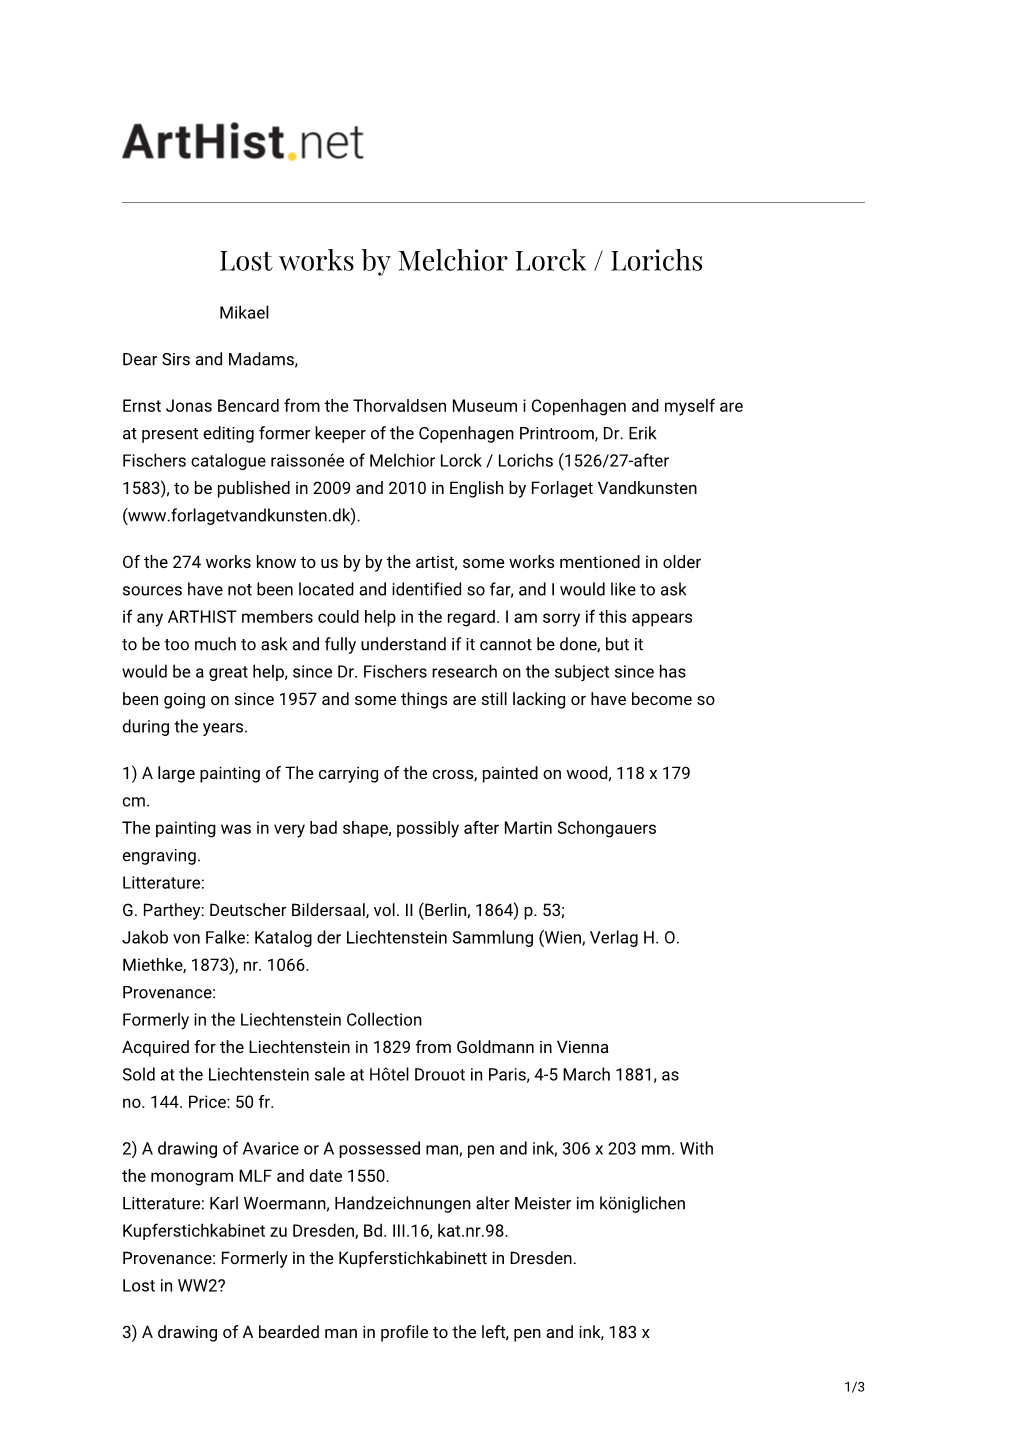 Lost Works by Melchior Lorck / Lorichs